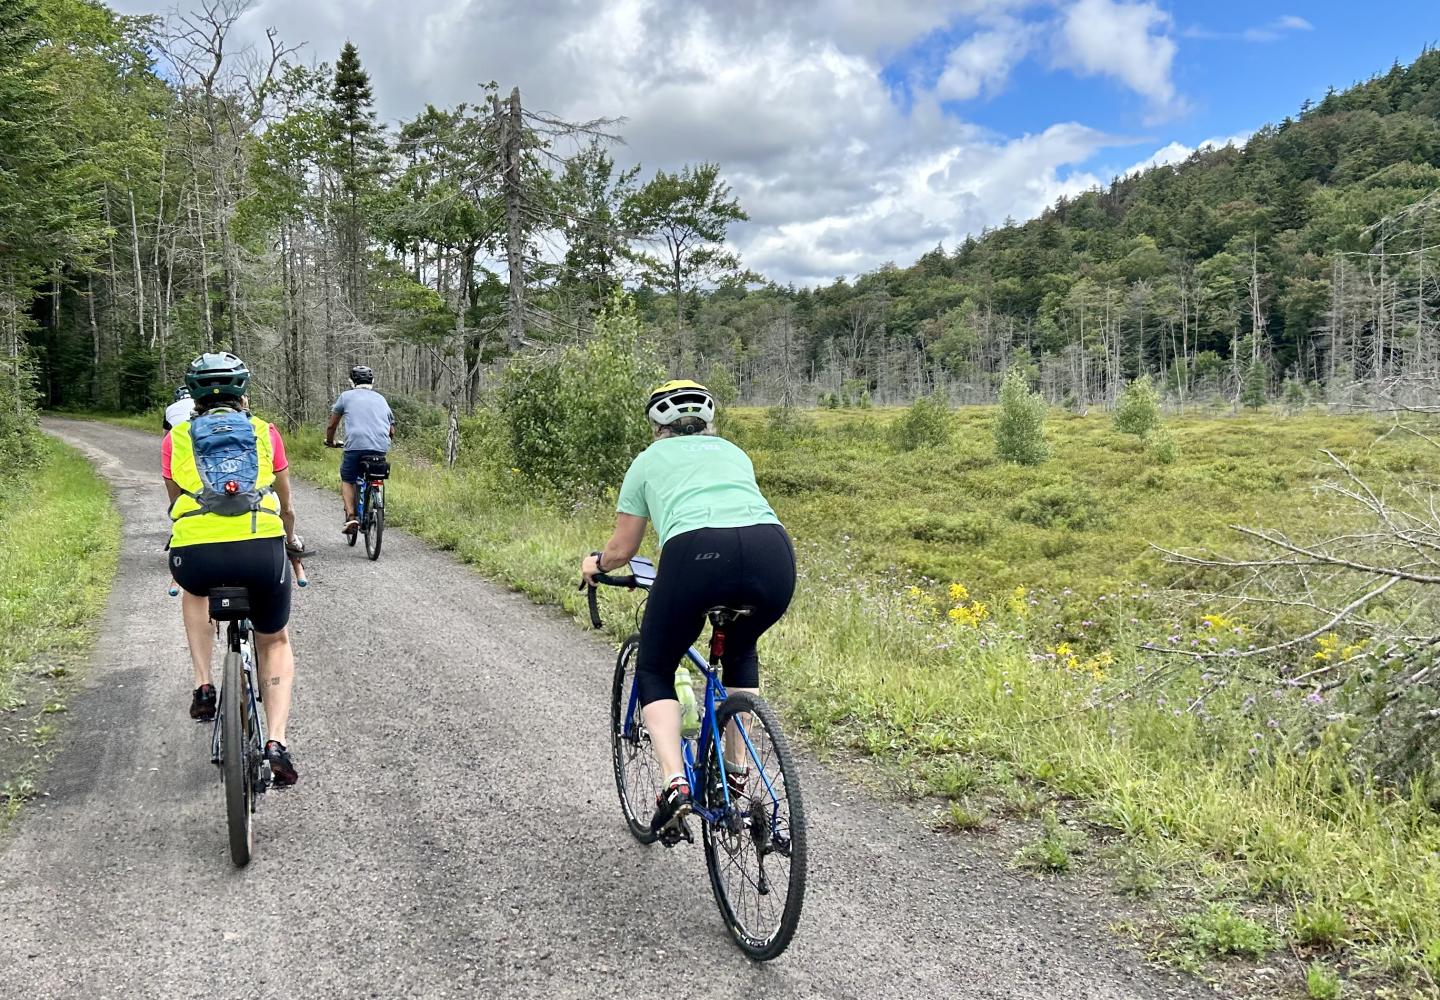 The Great Camp Sagamore Experience features outstanding gravel cycling and truly one of the greatest lodging experiences in the Adirondacks.